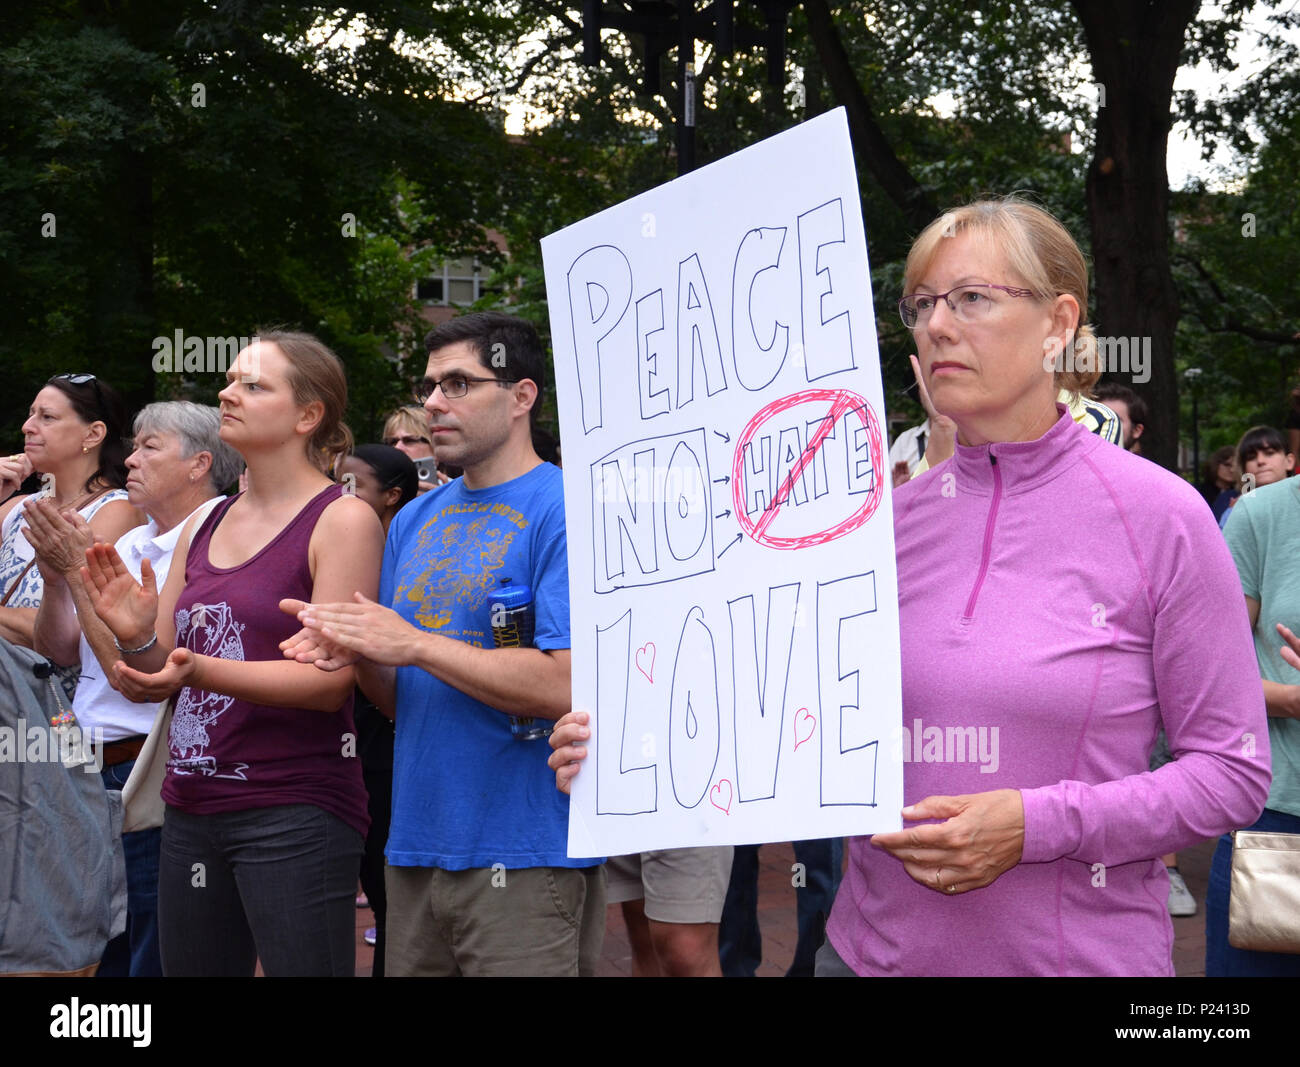 ANN ARBOR, MI - AUG 13: A woman holds up a sign at a rally in solidarity with the counter-protesters of Charlottesville, VA in Ann Arbor, MI on August Stock Photo